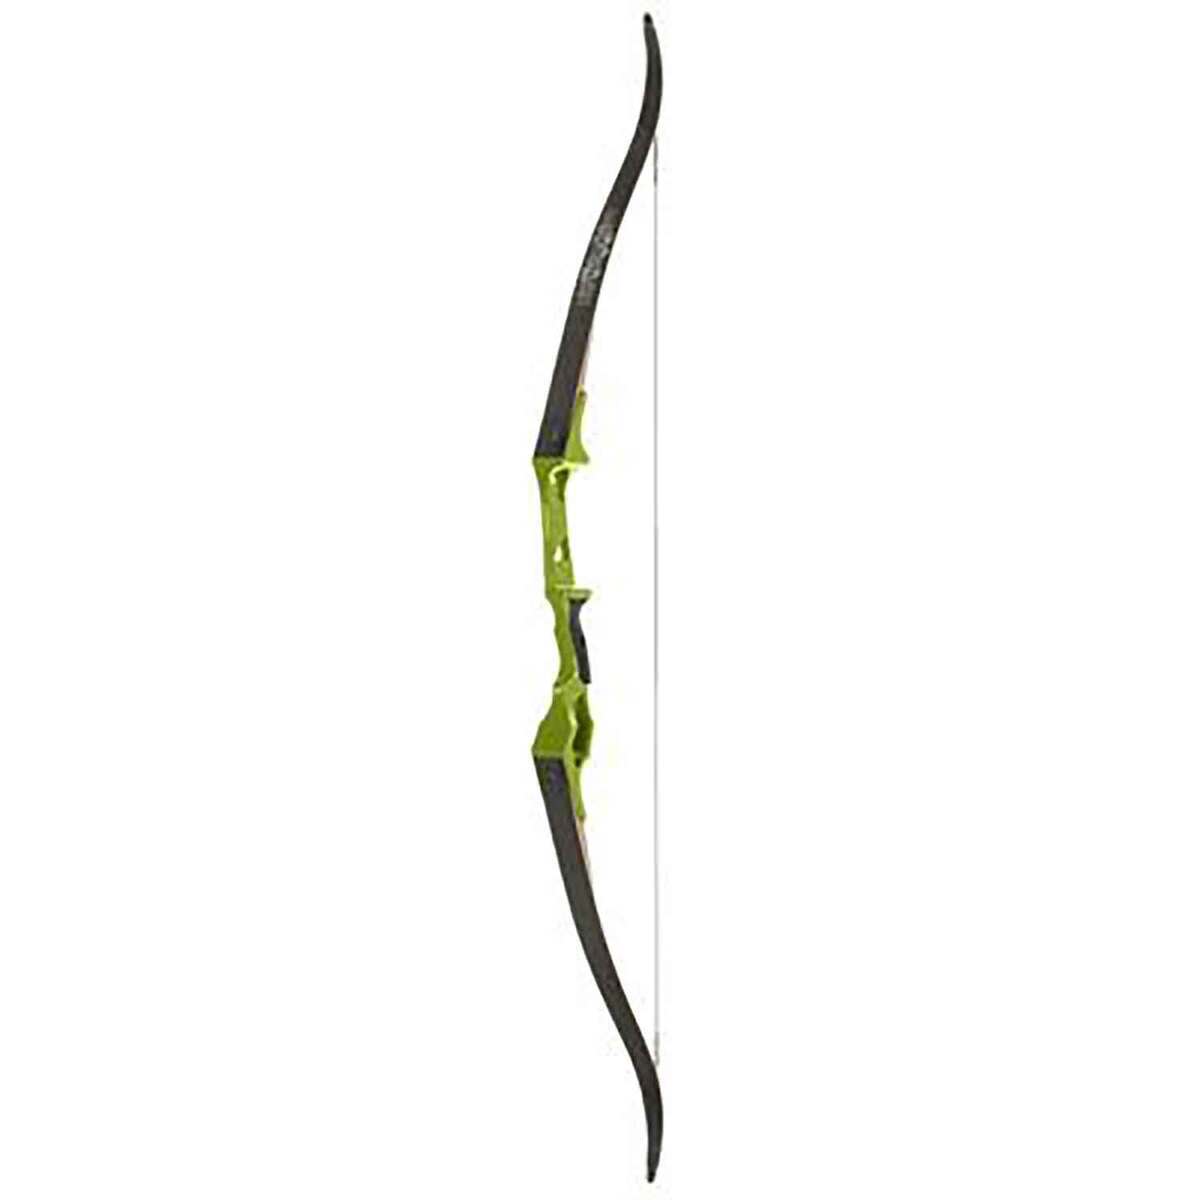 Fin-Finder Bank Runner 35lbs Right Hand Green Traditional Recurve